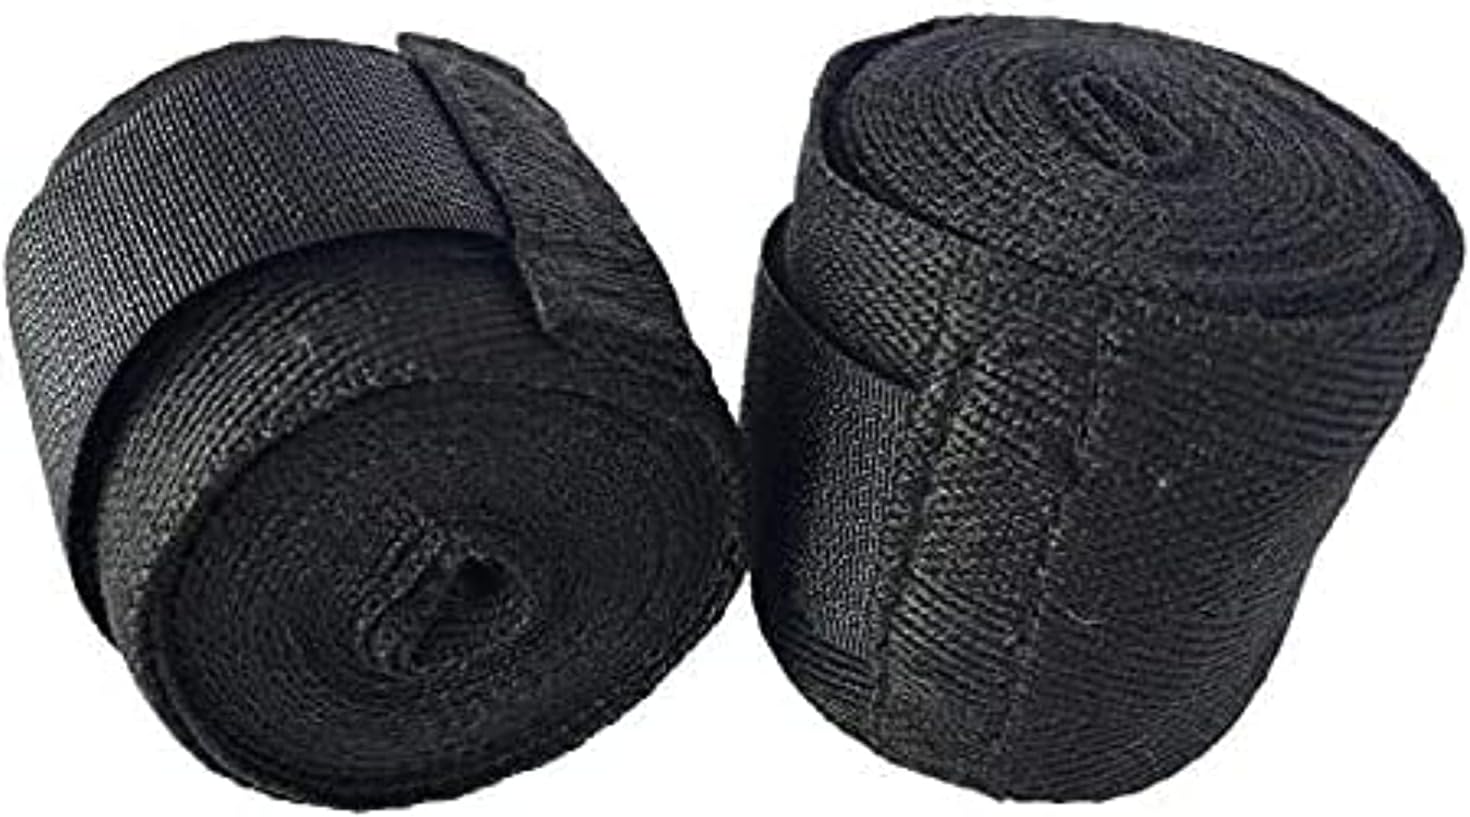 SCIENISH Boxing Hand Wraps Elasticated MMA Boxing Gloves Fist Protector 2.5 meter Bandages Mitts Boxing Wraps(2PCS)